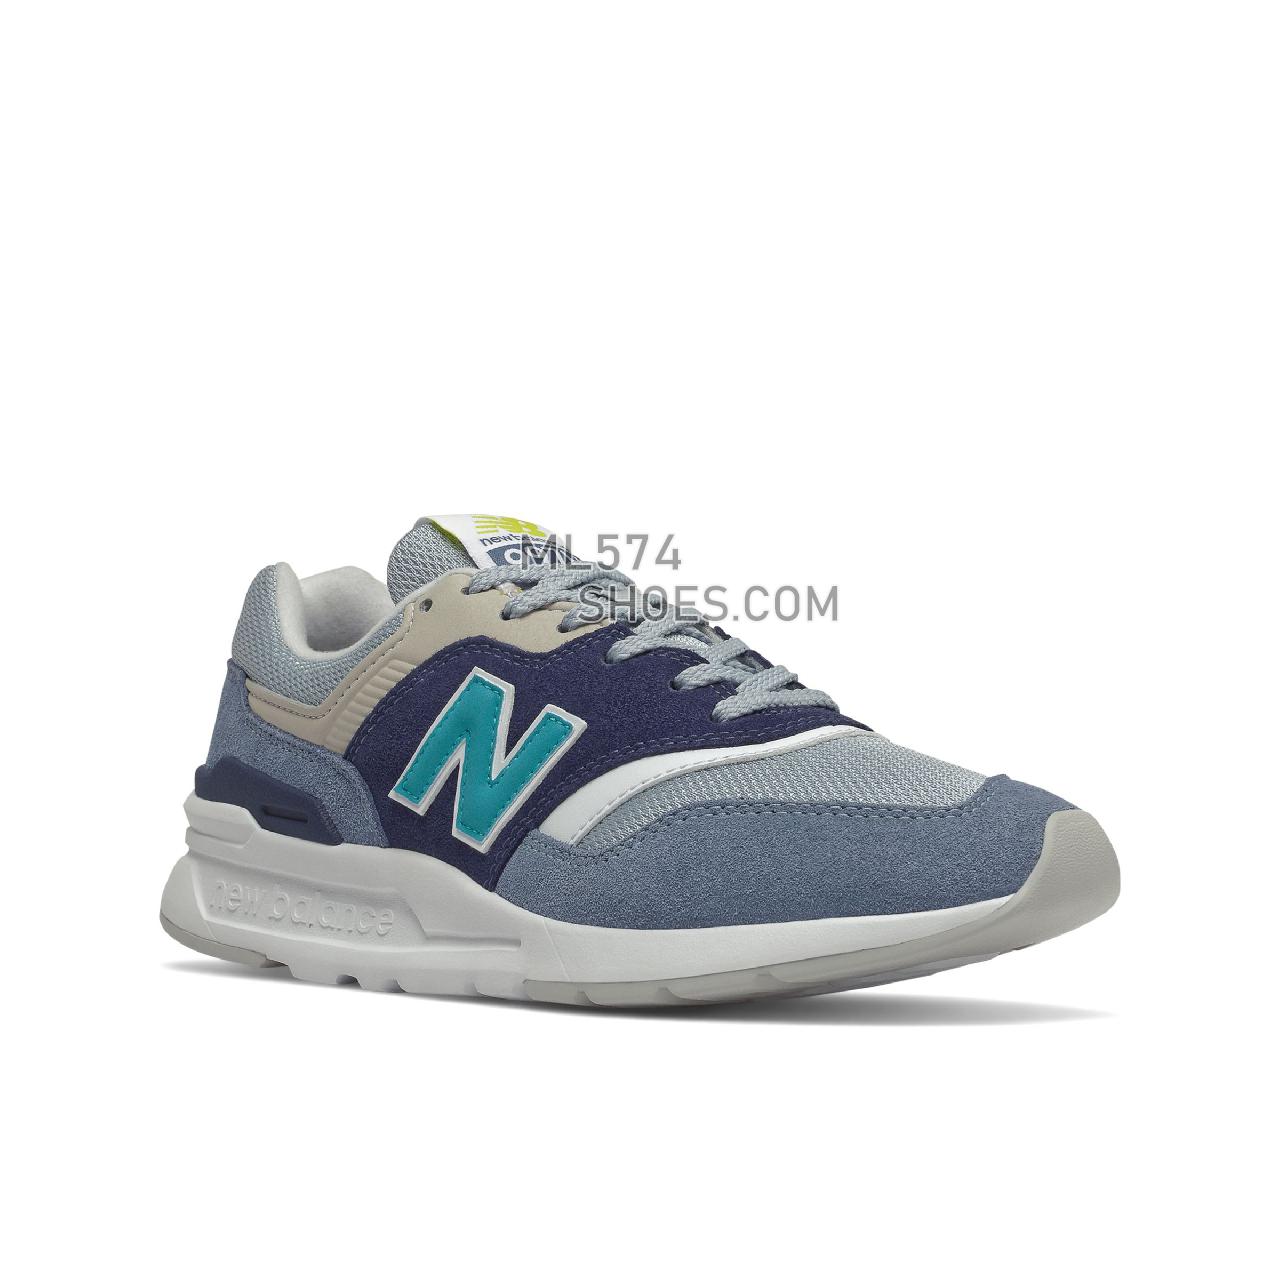 New Balance 997H - Women's Classic Sneakers - Navy with Grey - CW997HVF